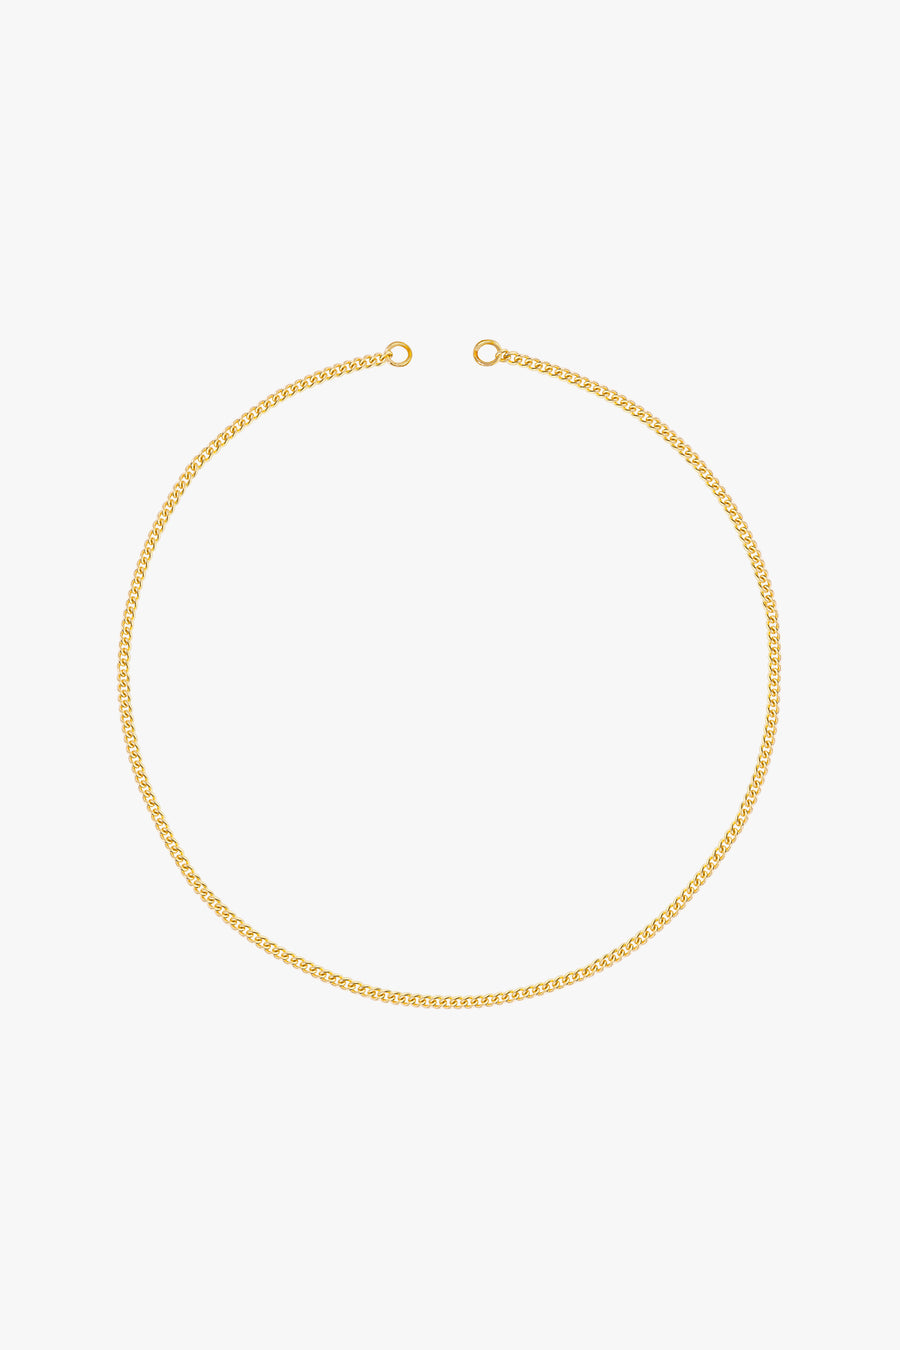 Curb Clasp Chain in Gold